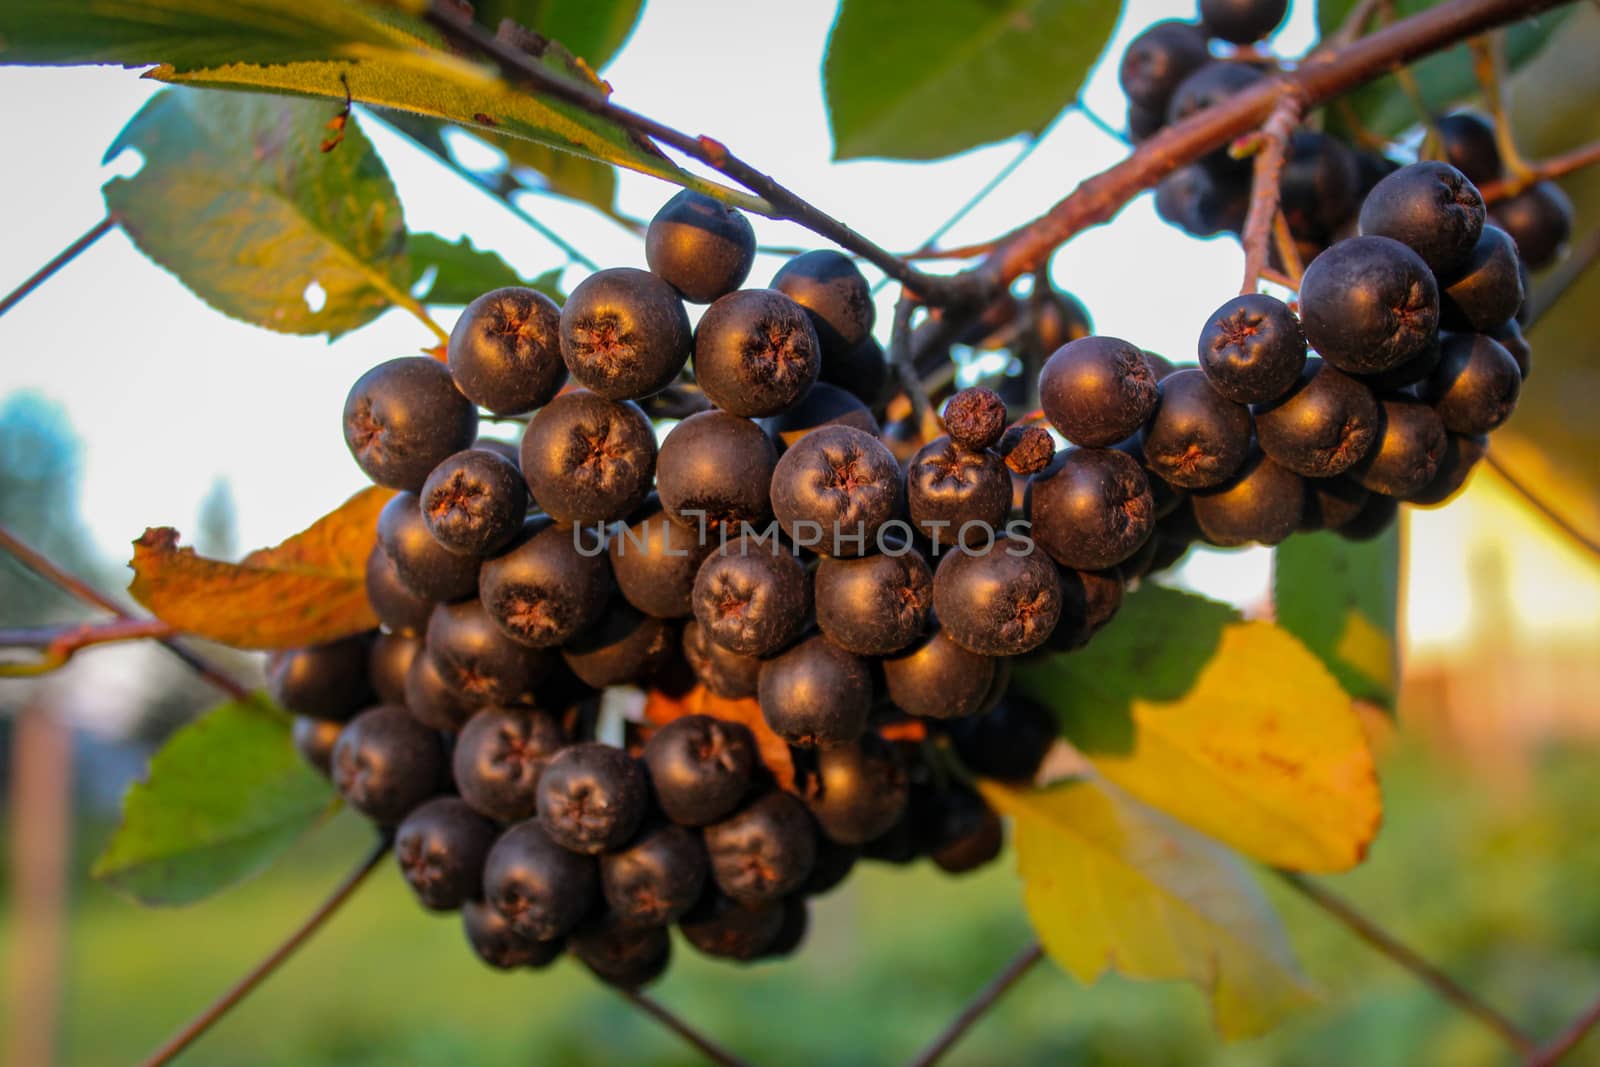 A large group of chokeberry berries on a branch. Aronia berries. Zavidovici, Bosnia and Herzegovina.